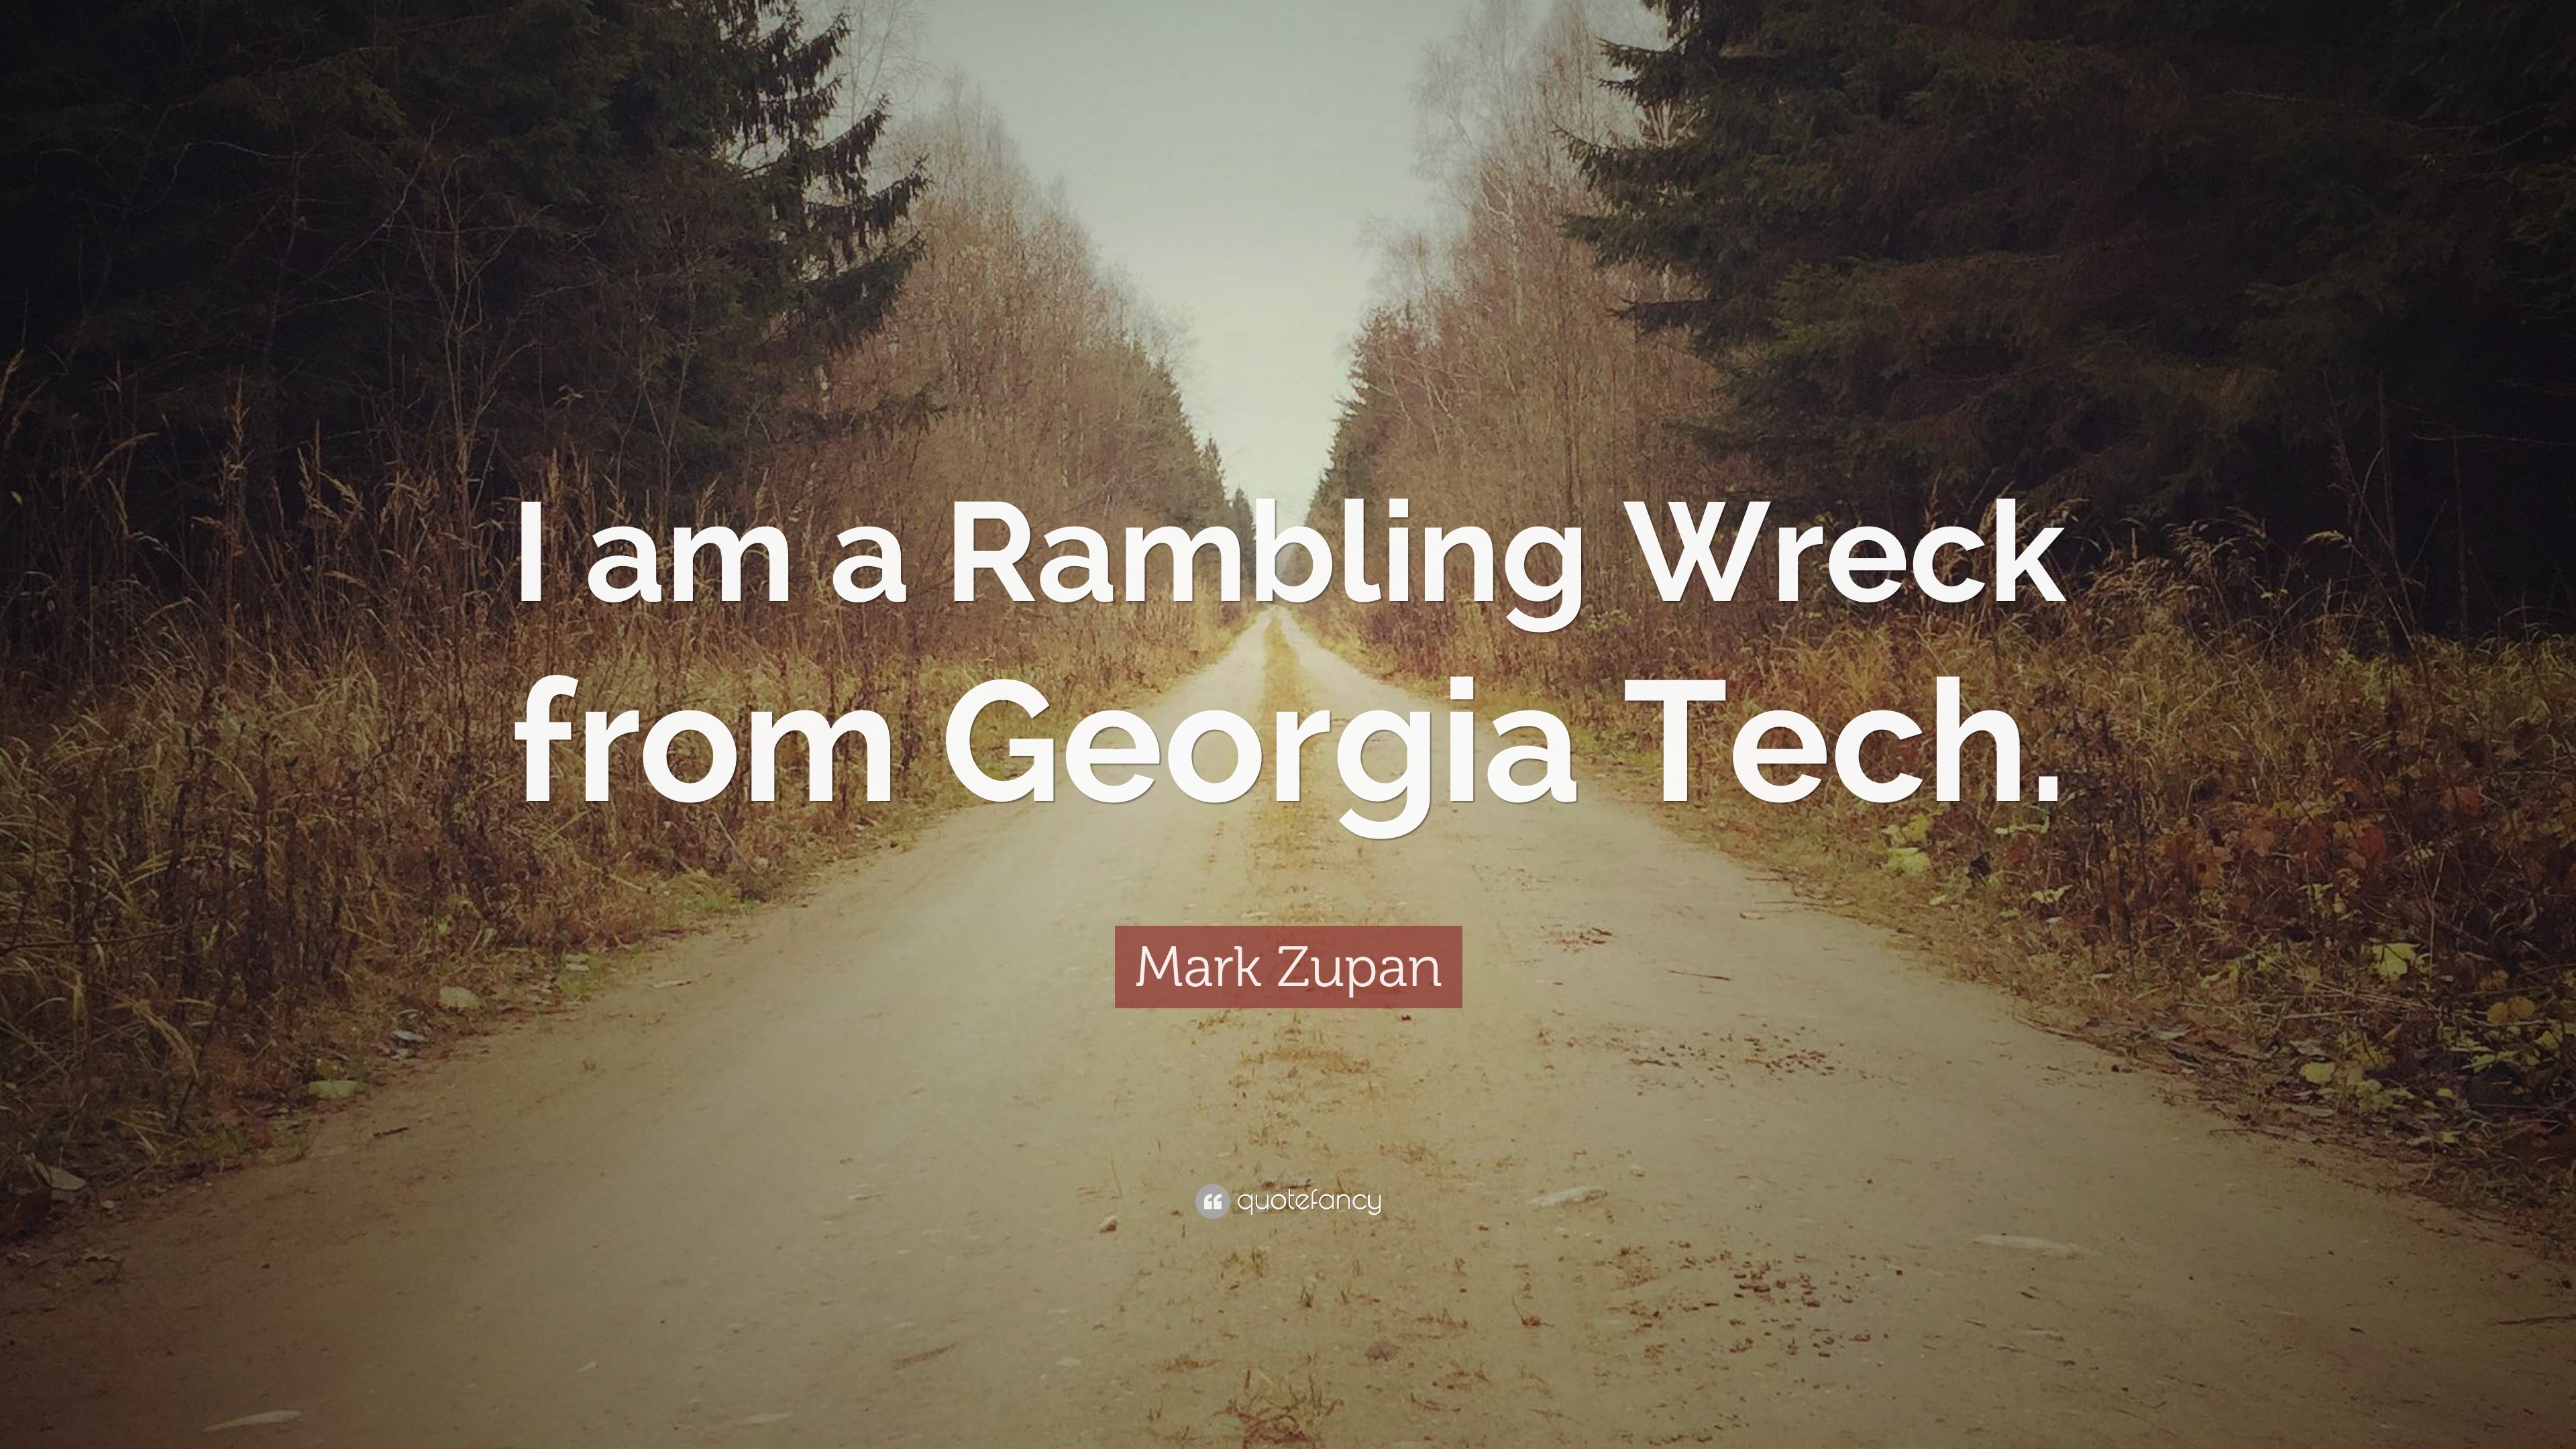 3840x2160 9 wallpapers. Mark Zupan Quote: “I am a Rambling Wreck from Georgia Tech.”